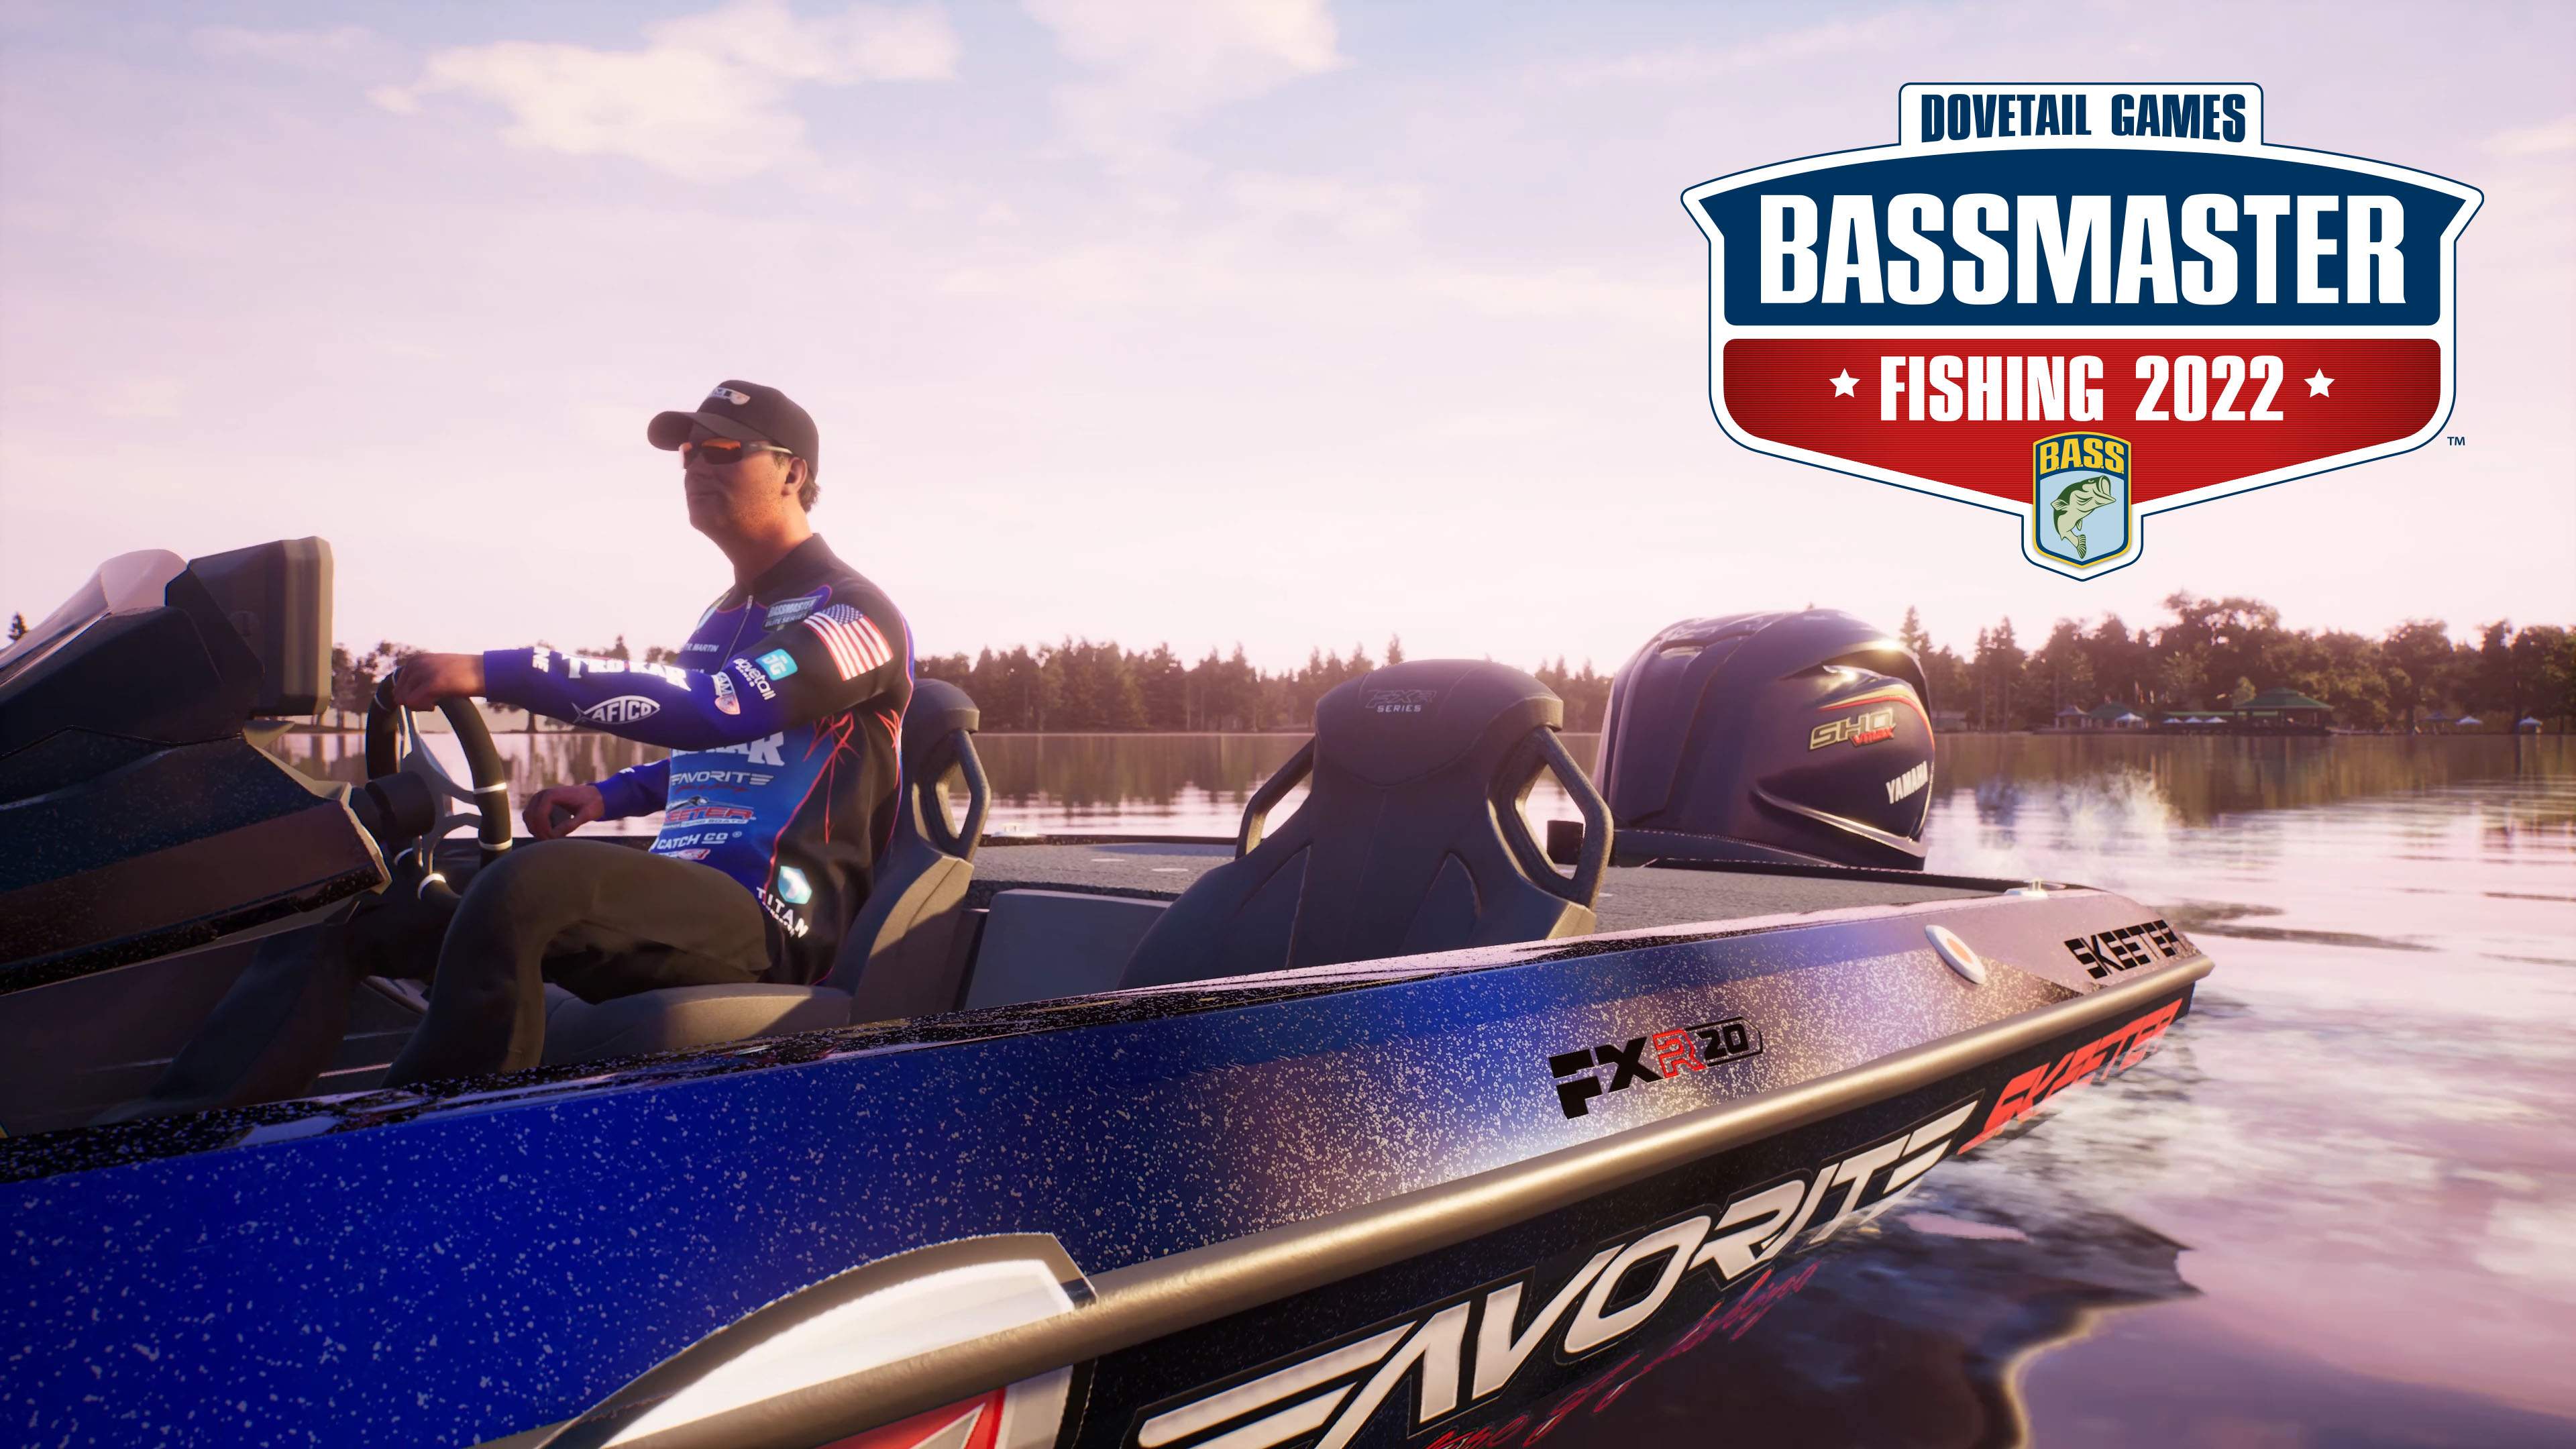 Closed - Fishing the Bassmaster® 2022 Join Xbox Beta! - Wire